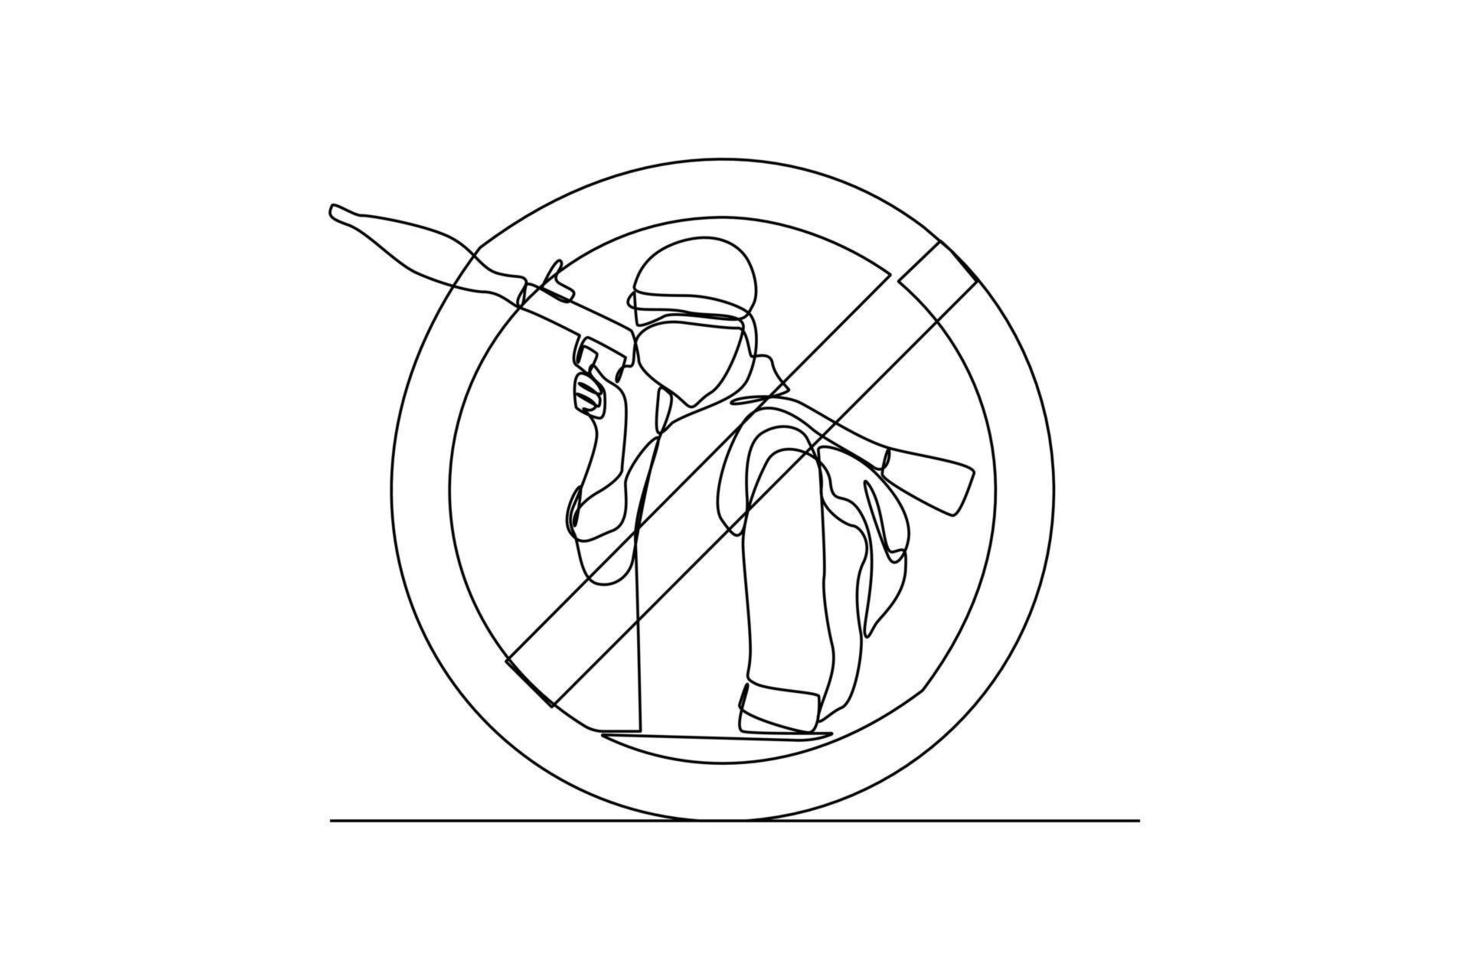 Single one line drawing say no terrorism. Anti terrorism concept. Continuous line draw design graphic vector illustration.